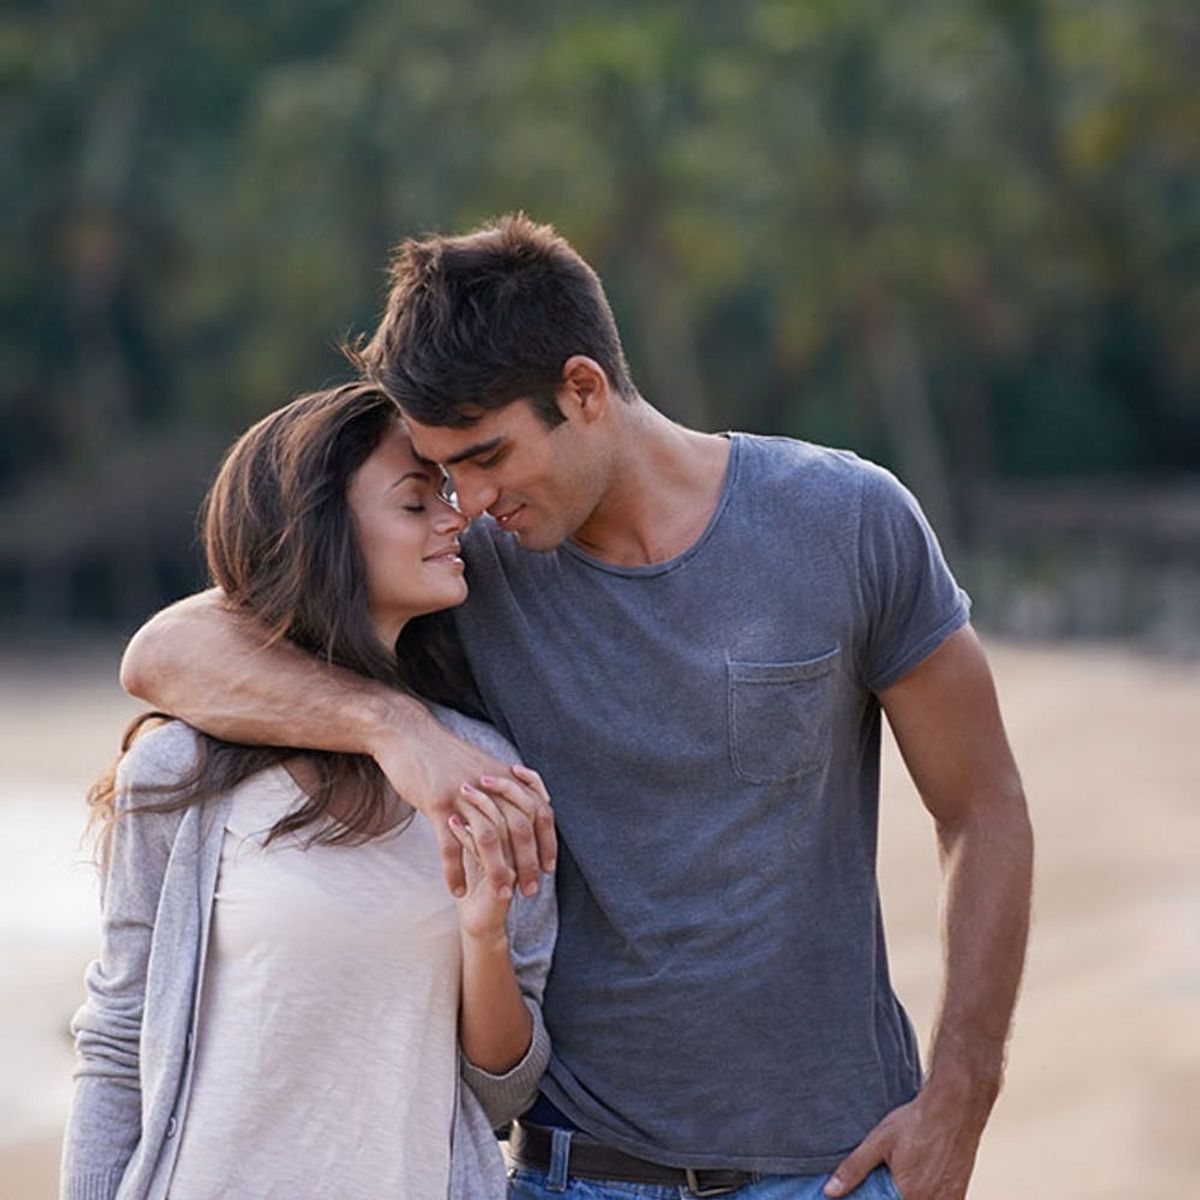 Why We Shouldn’t Automatically Assume Men Aren’t Romantic